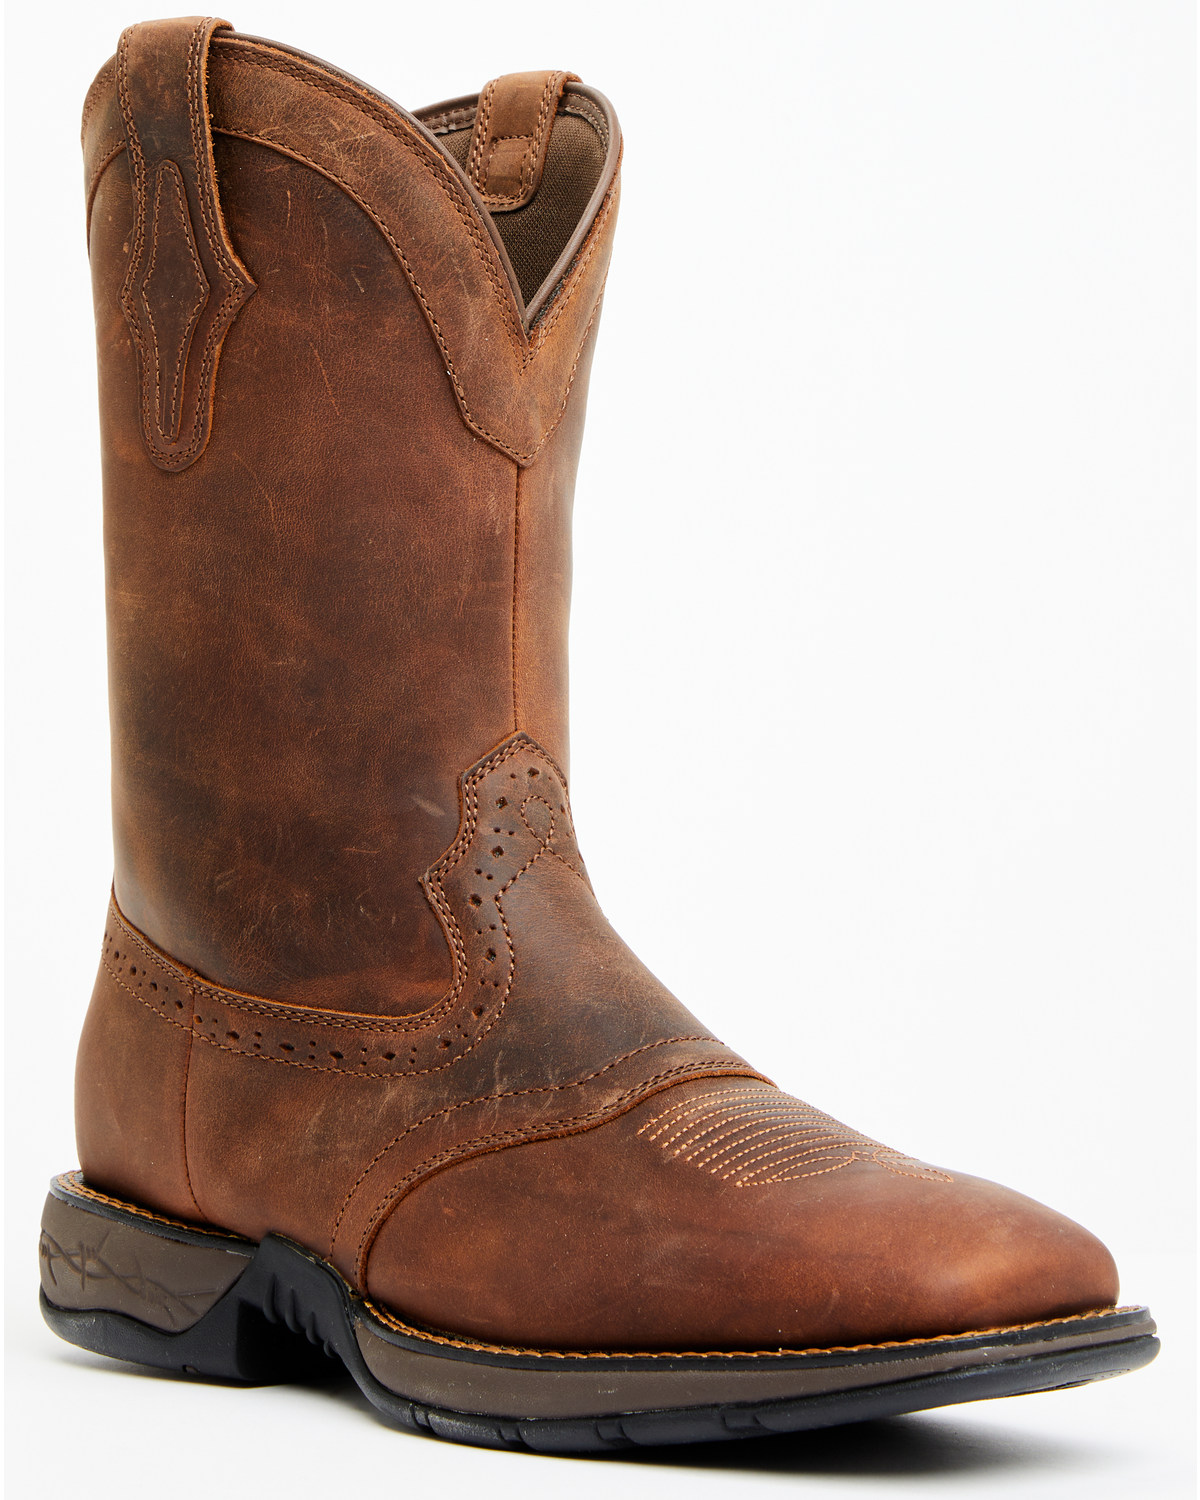 Cody James Men's Summit Lite Performance Western Boots - Broad Square Toe